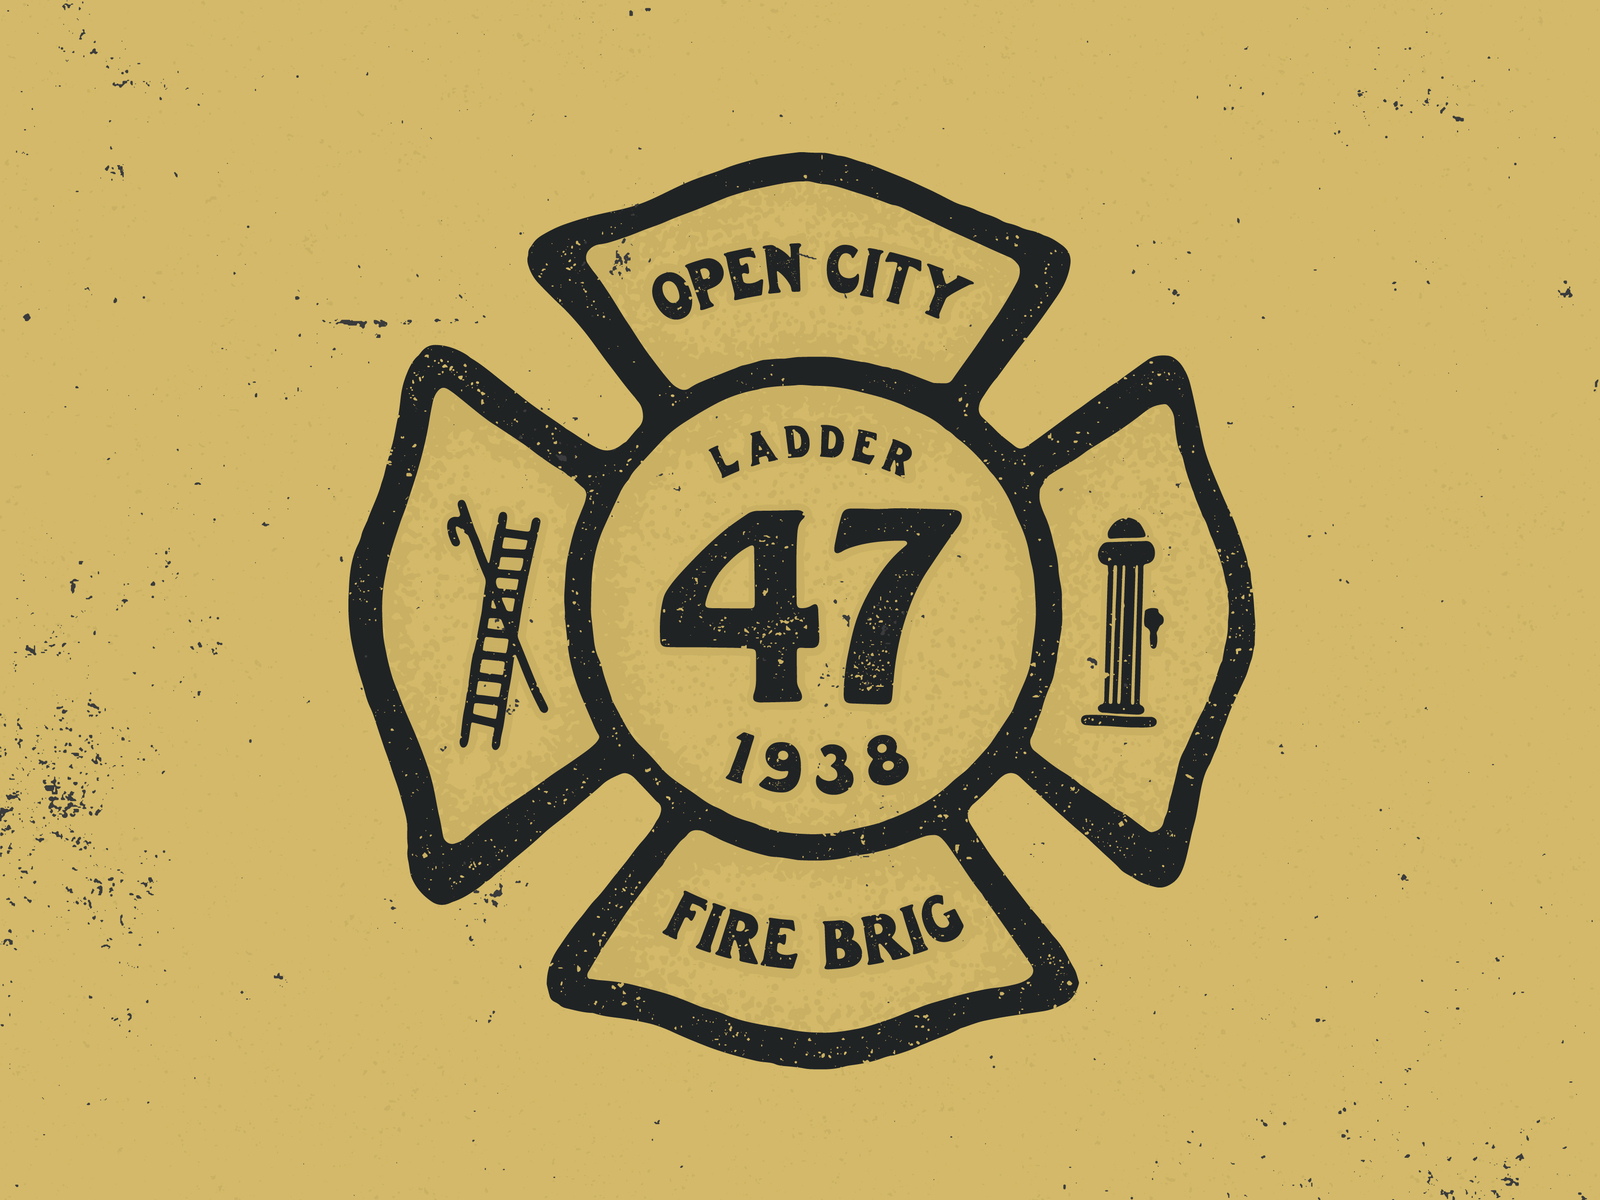 Fire brigade by Phil MacIsaac on Dribbble